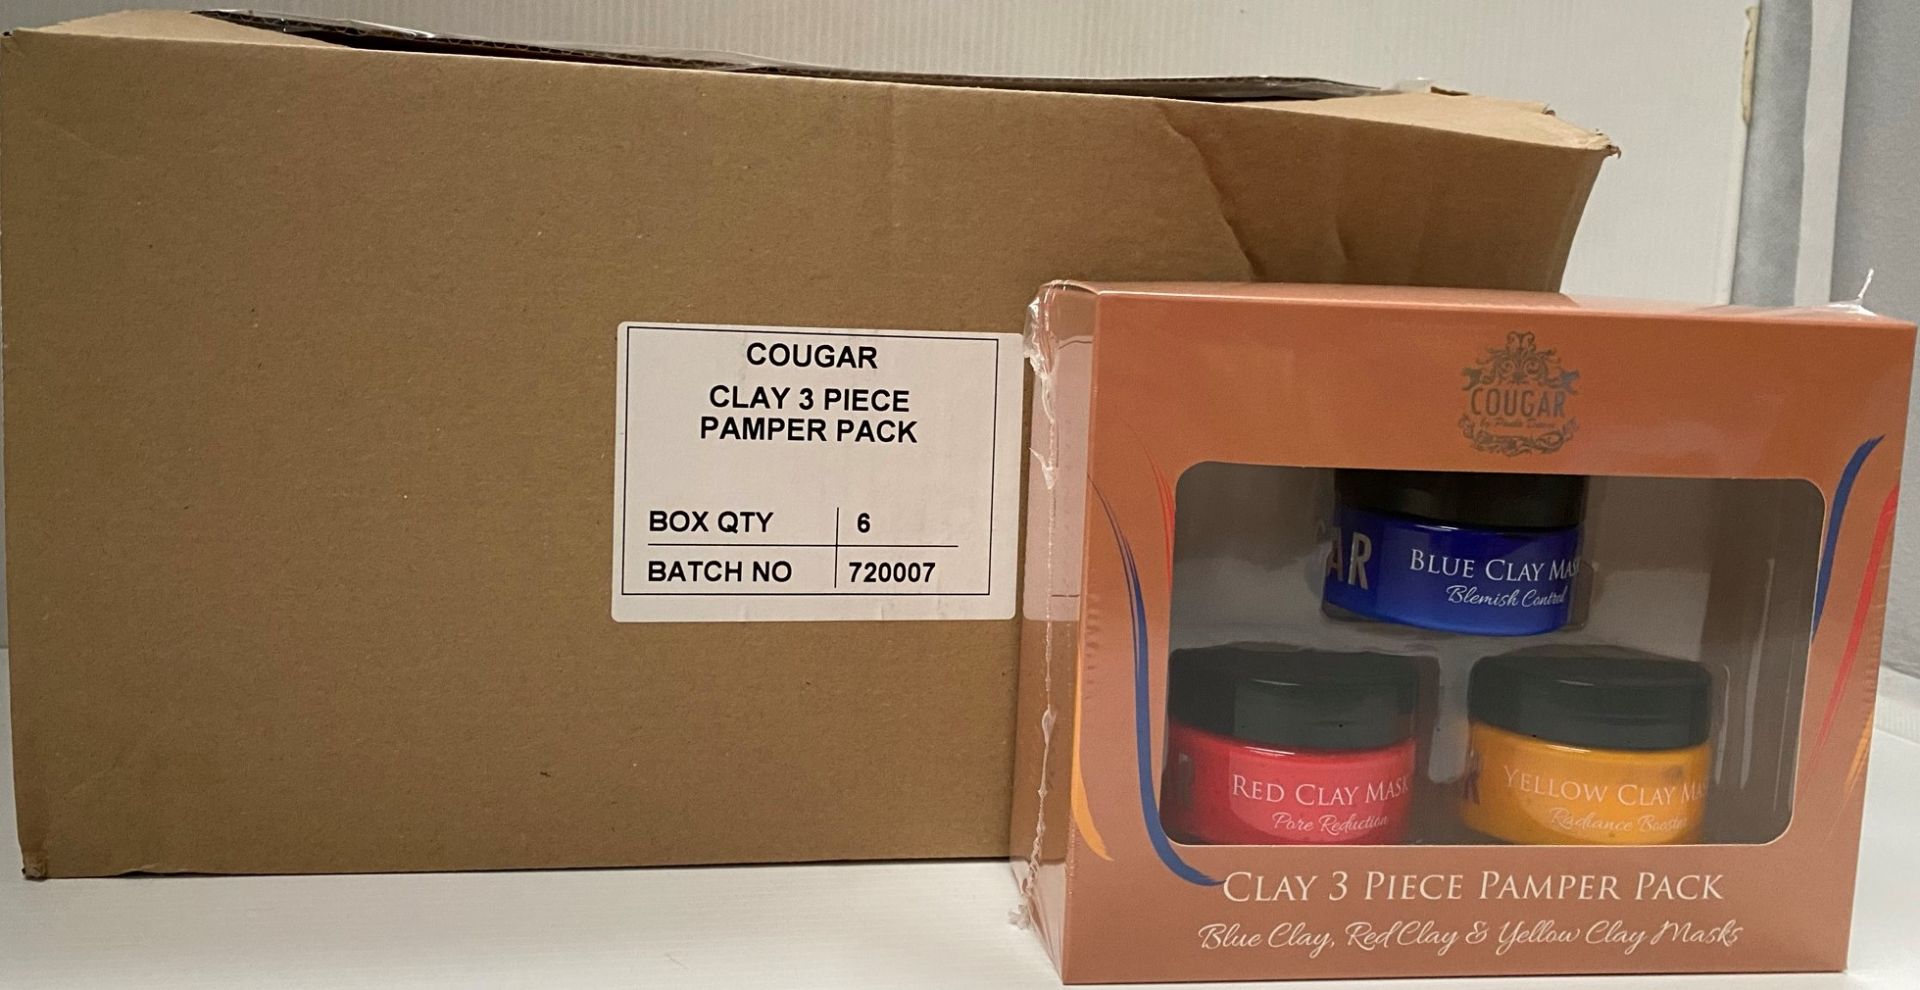 24 x Cougar Clay 3 piece Pamper Packs - Blue Clay, - Image 2 of 2